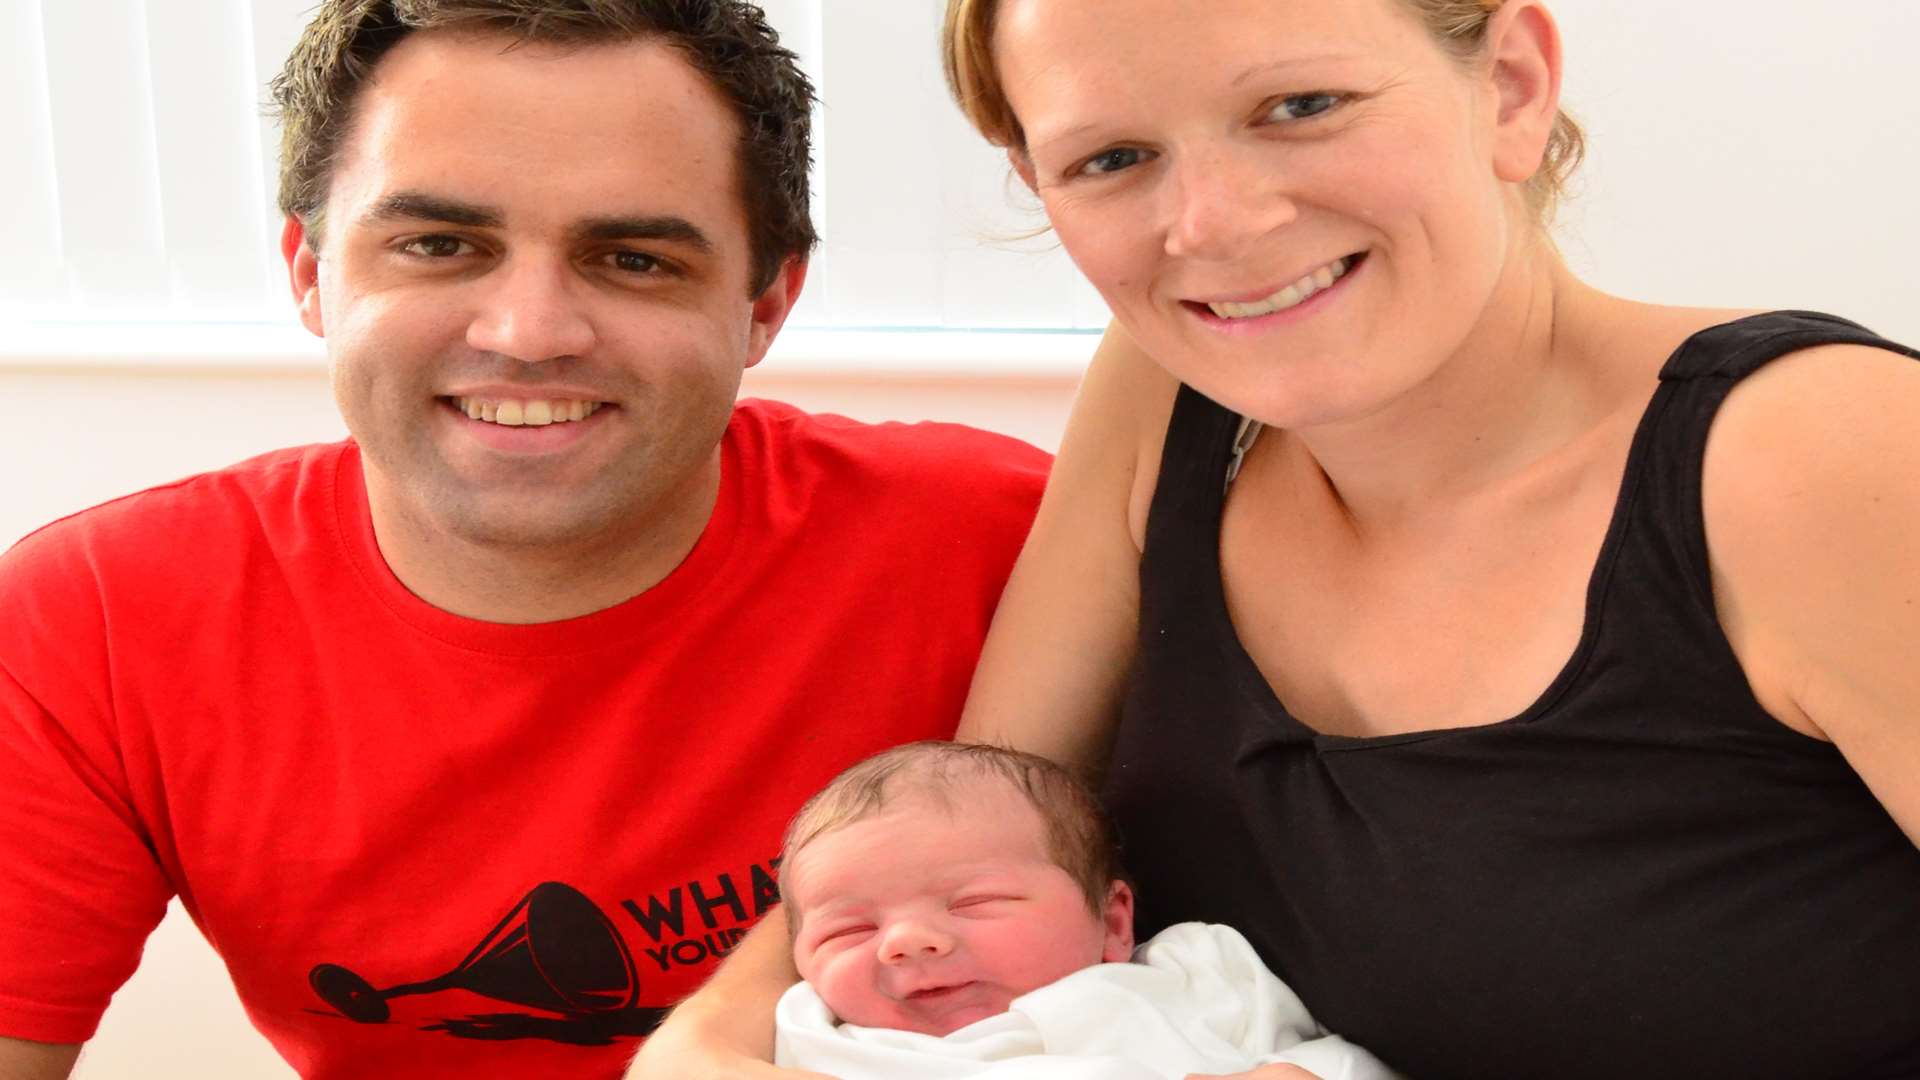 Caleb Thompson was the first baby born at Maidstone Birthing Centre in 2011. Pictured with parents Beth and Mark Thompson.